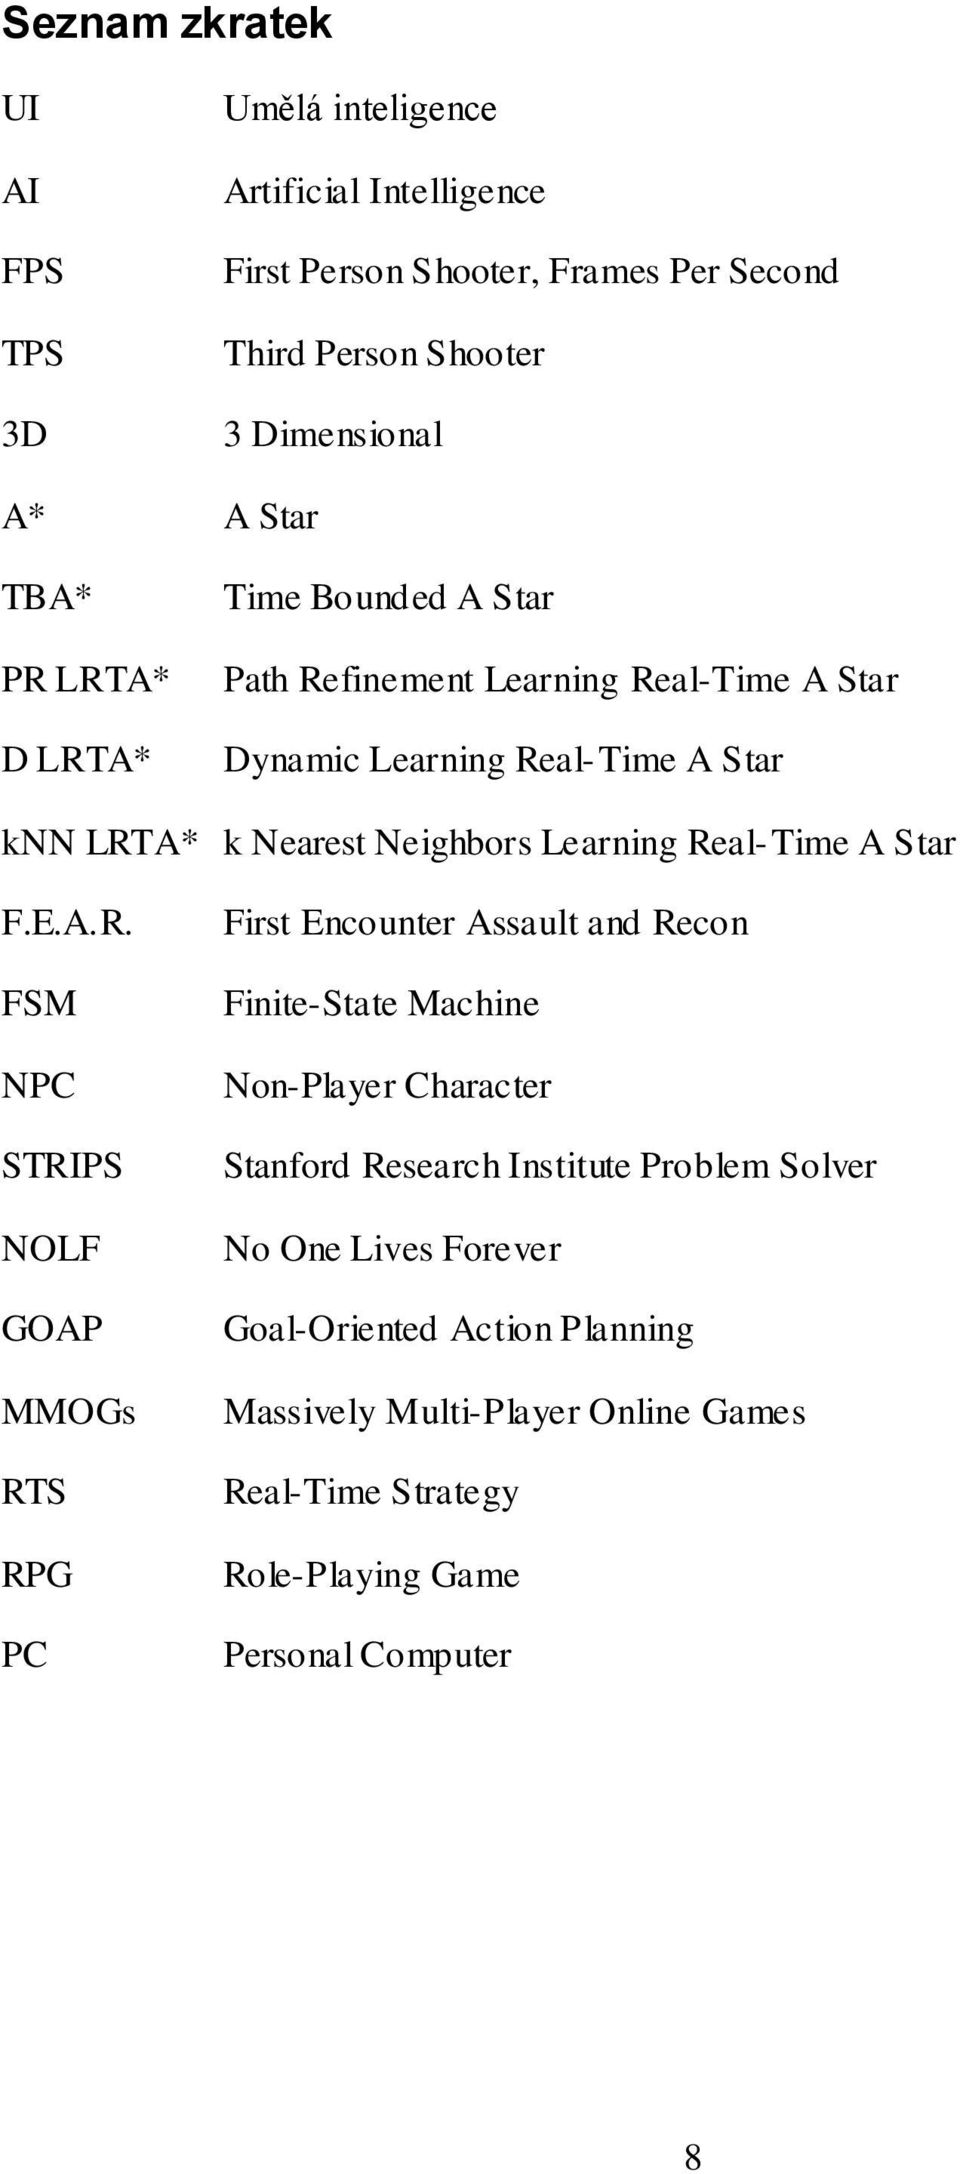 Real-Time A Star F.E.A.R. FSM NPC STRIPS NOLF GOAP MMOGs RTS RPG PC First Encounter Assault and Recon Finite-State Machine Non-Player Character Stanford Research